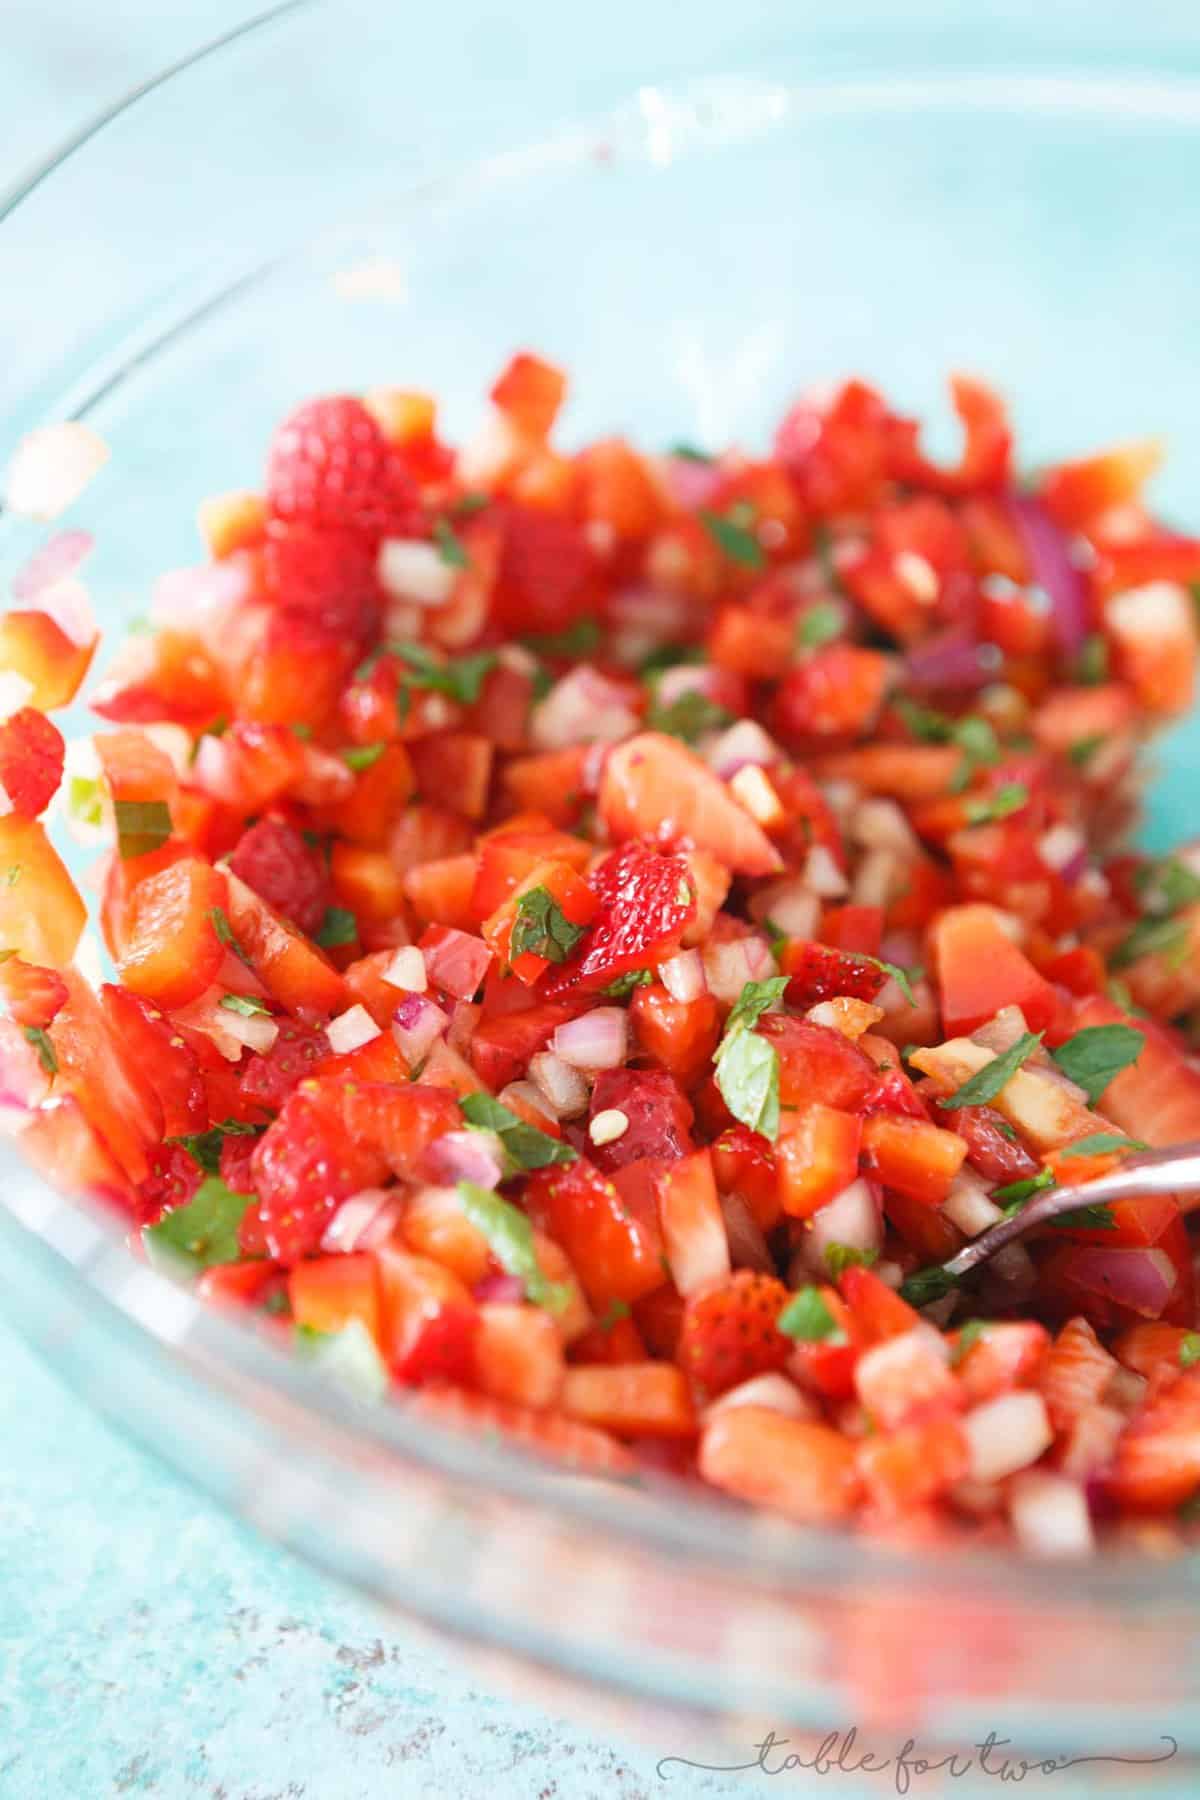 A refreshing strawberry mint salsa that is perfect for summer entertaining! A great way to use up in-season strawberries and your overabundant mint garden!